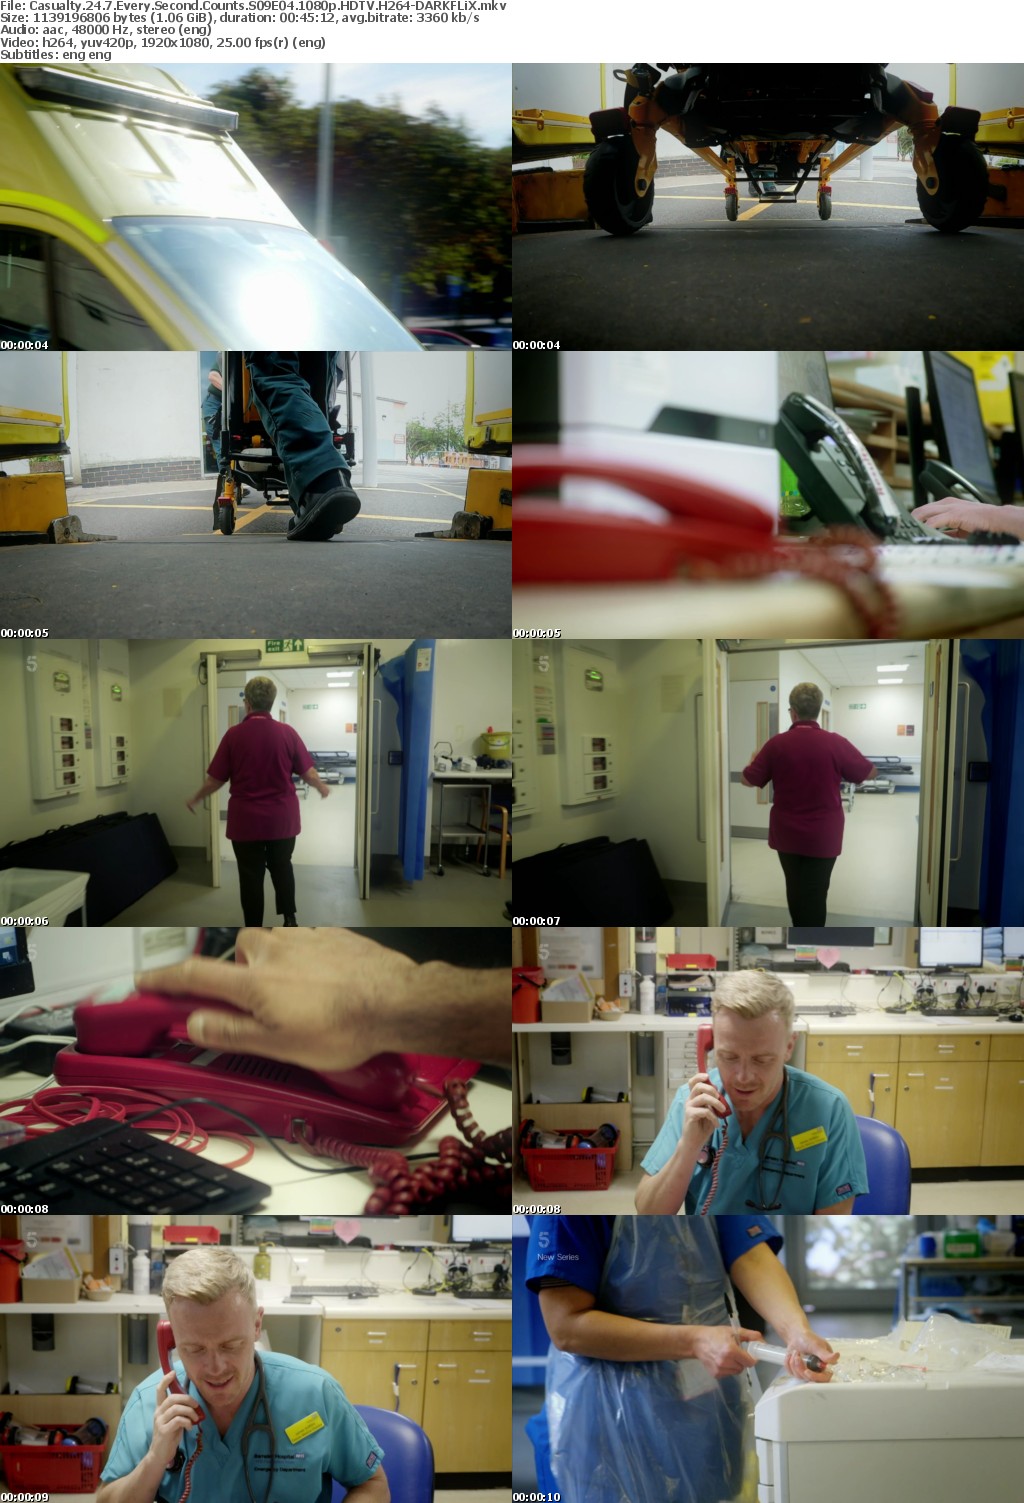 Casualty 24 7 Every Second Counts S09E04 1080p HDTV H264-DARKFLiX